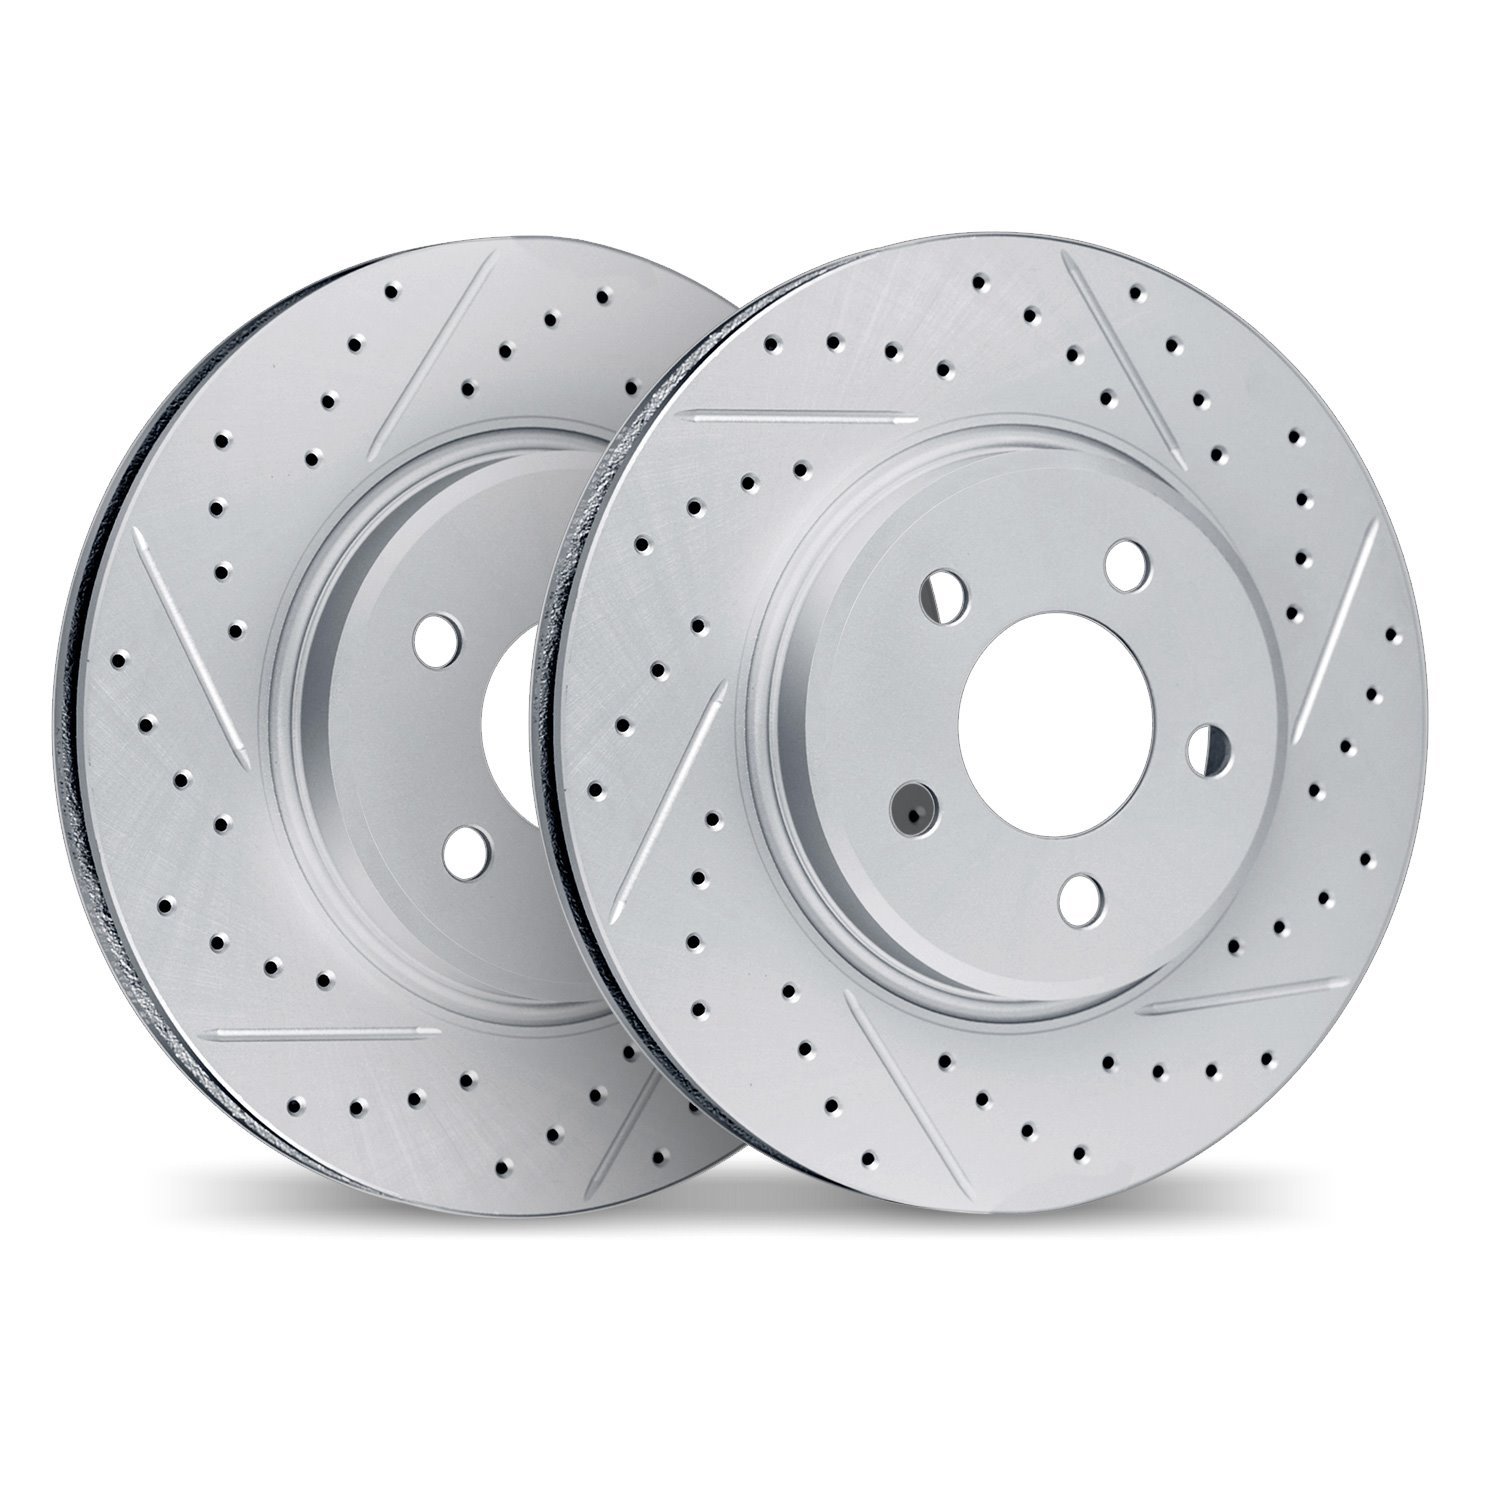 2002-58004 Geoperformance Drilled/Slotted Brake Rotors, 1997-2005 Acura/Honda, Position: Front